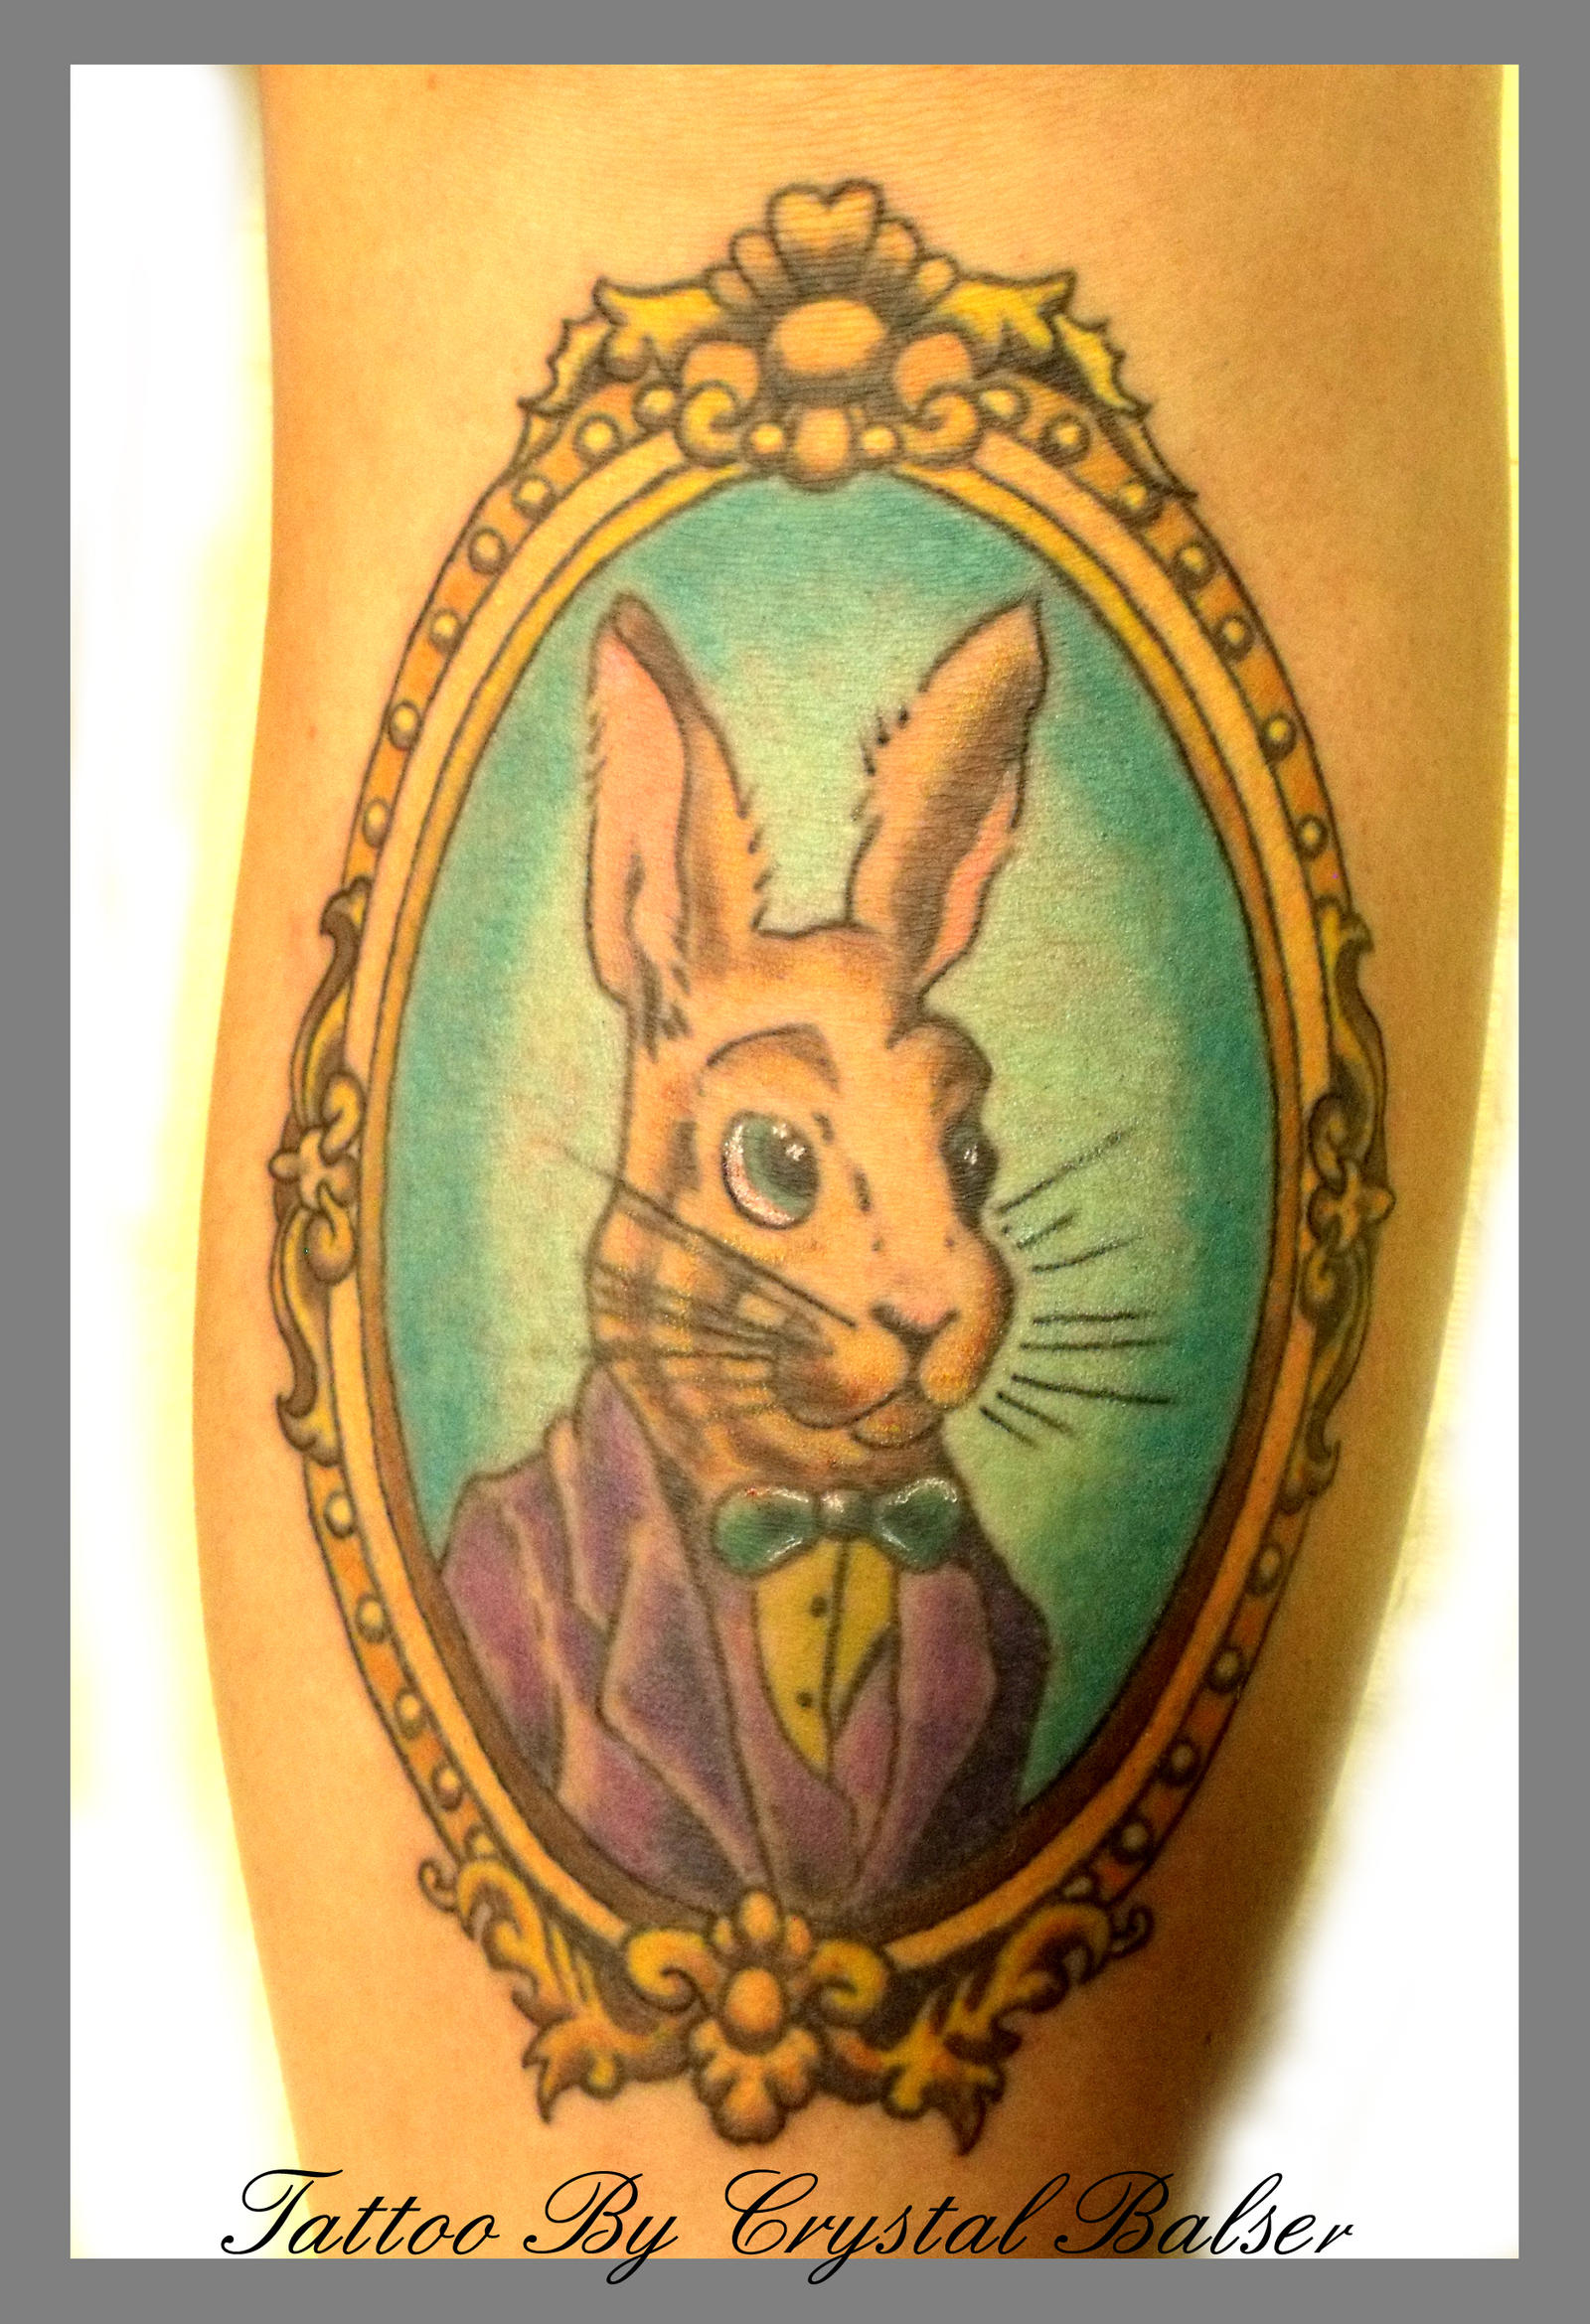 Mr. Bunny in a frame tattoo